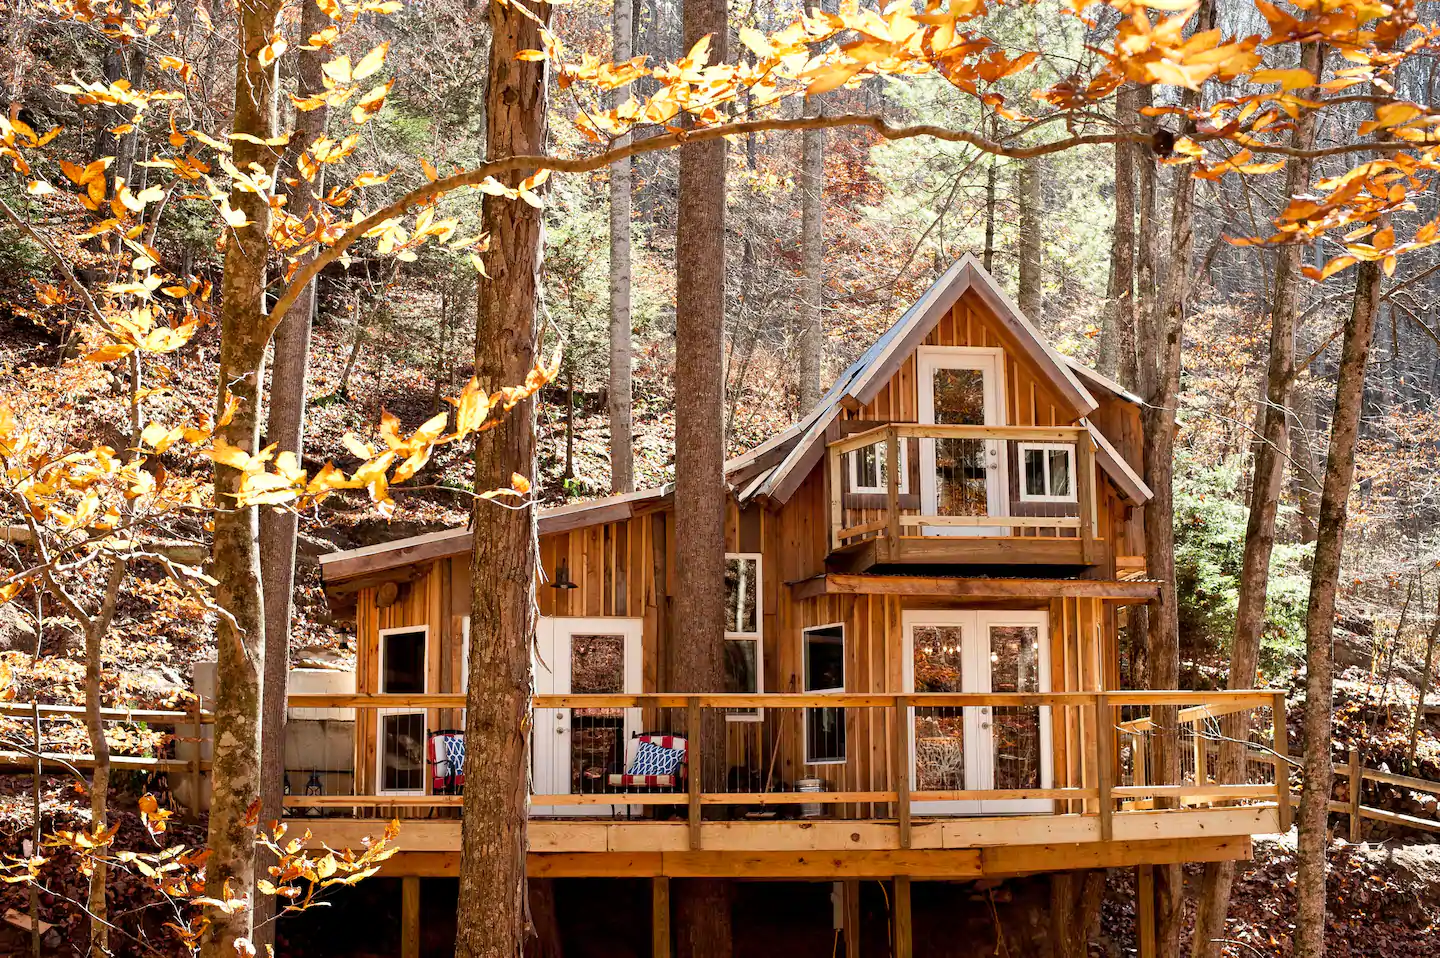 Staying at a scenic treehouse is a fun and unique weekend getaway in North Carolina.